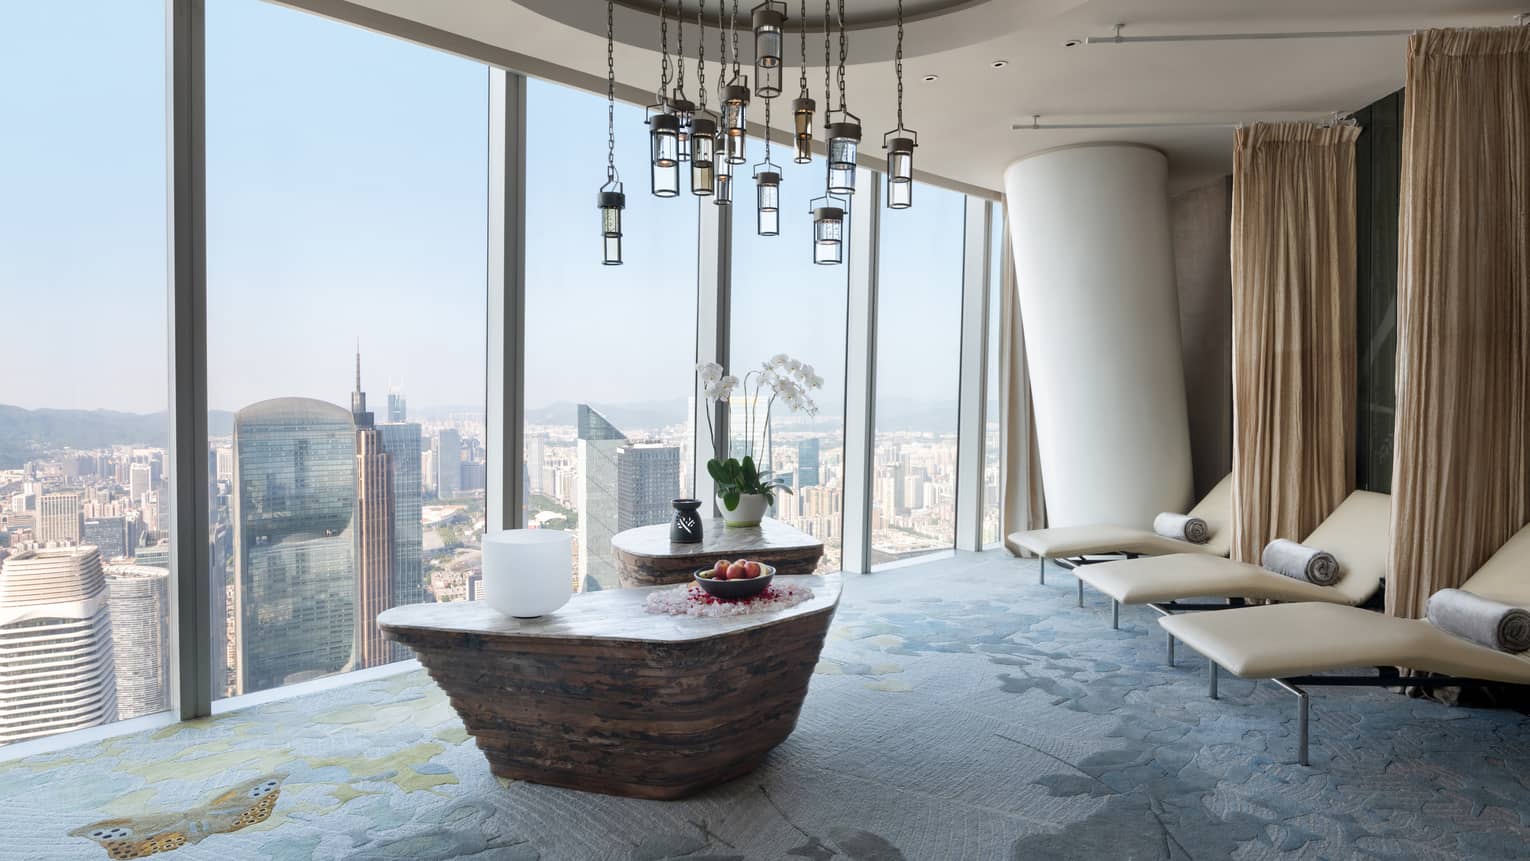 Large soaking tub filled with flower petals overlooking the cityscape from floor-to-ceiling windows